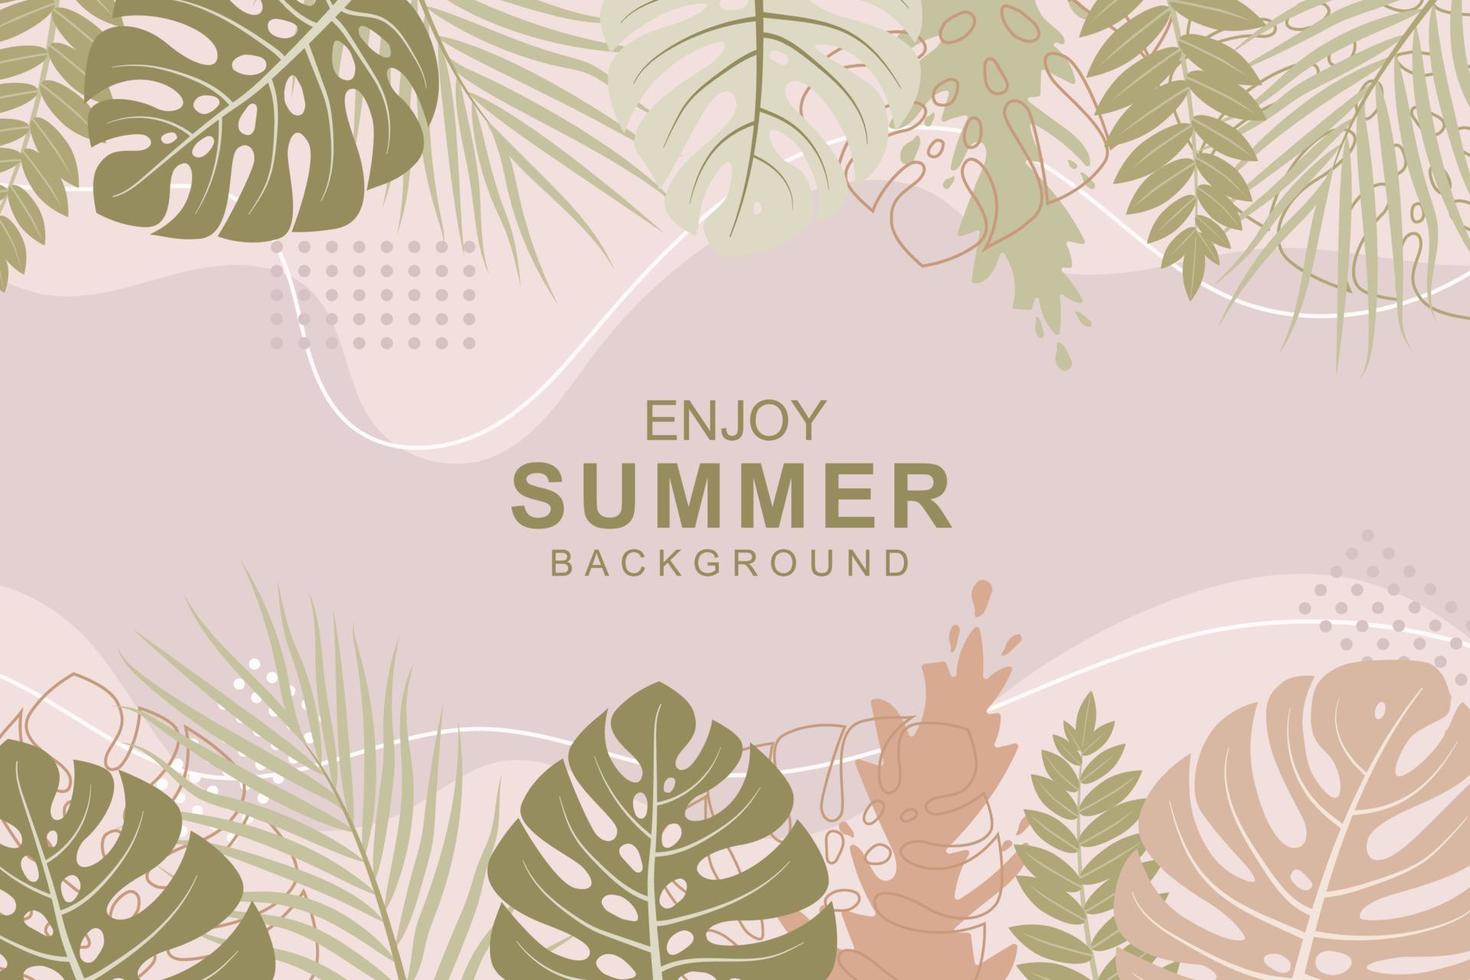 Beautiful hand drawn tropical summer background vector